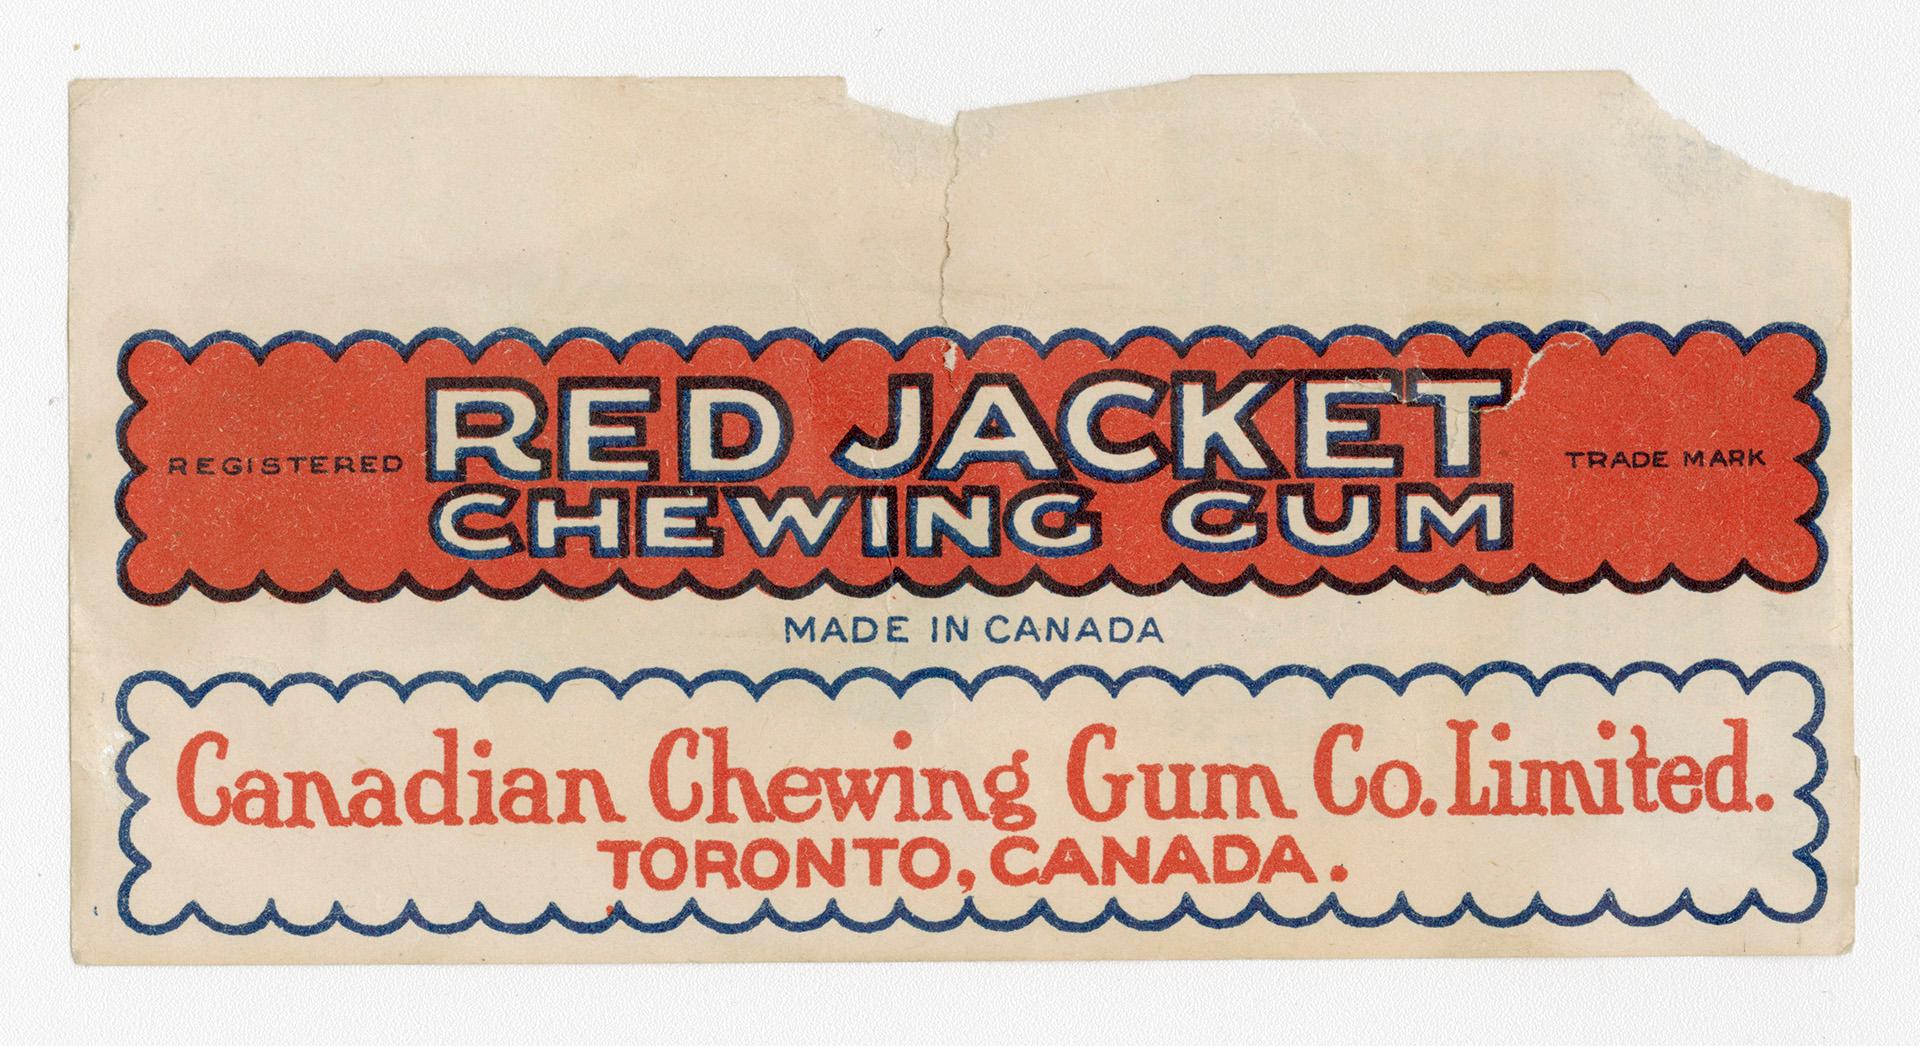 Red Jacket Chewing Gum, Great Bear